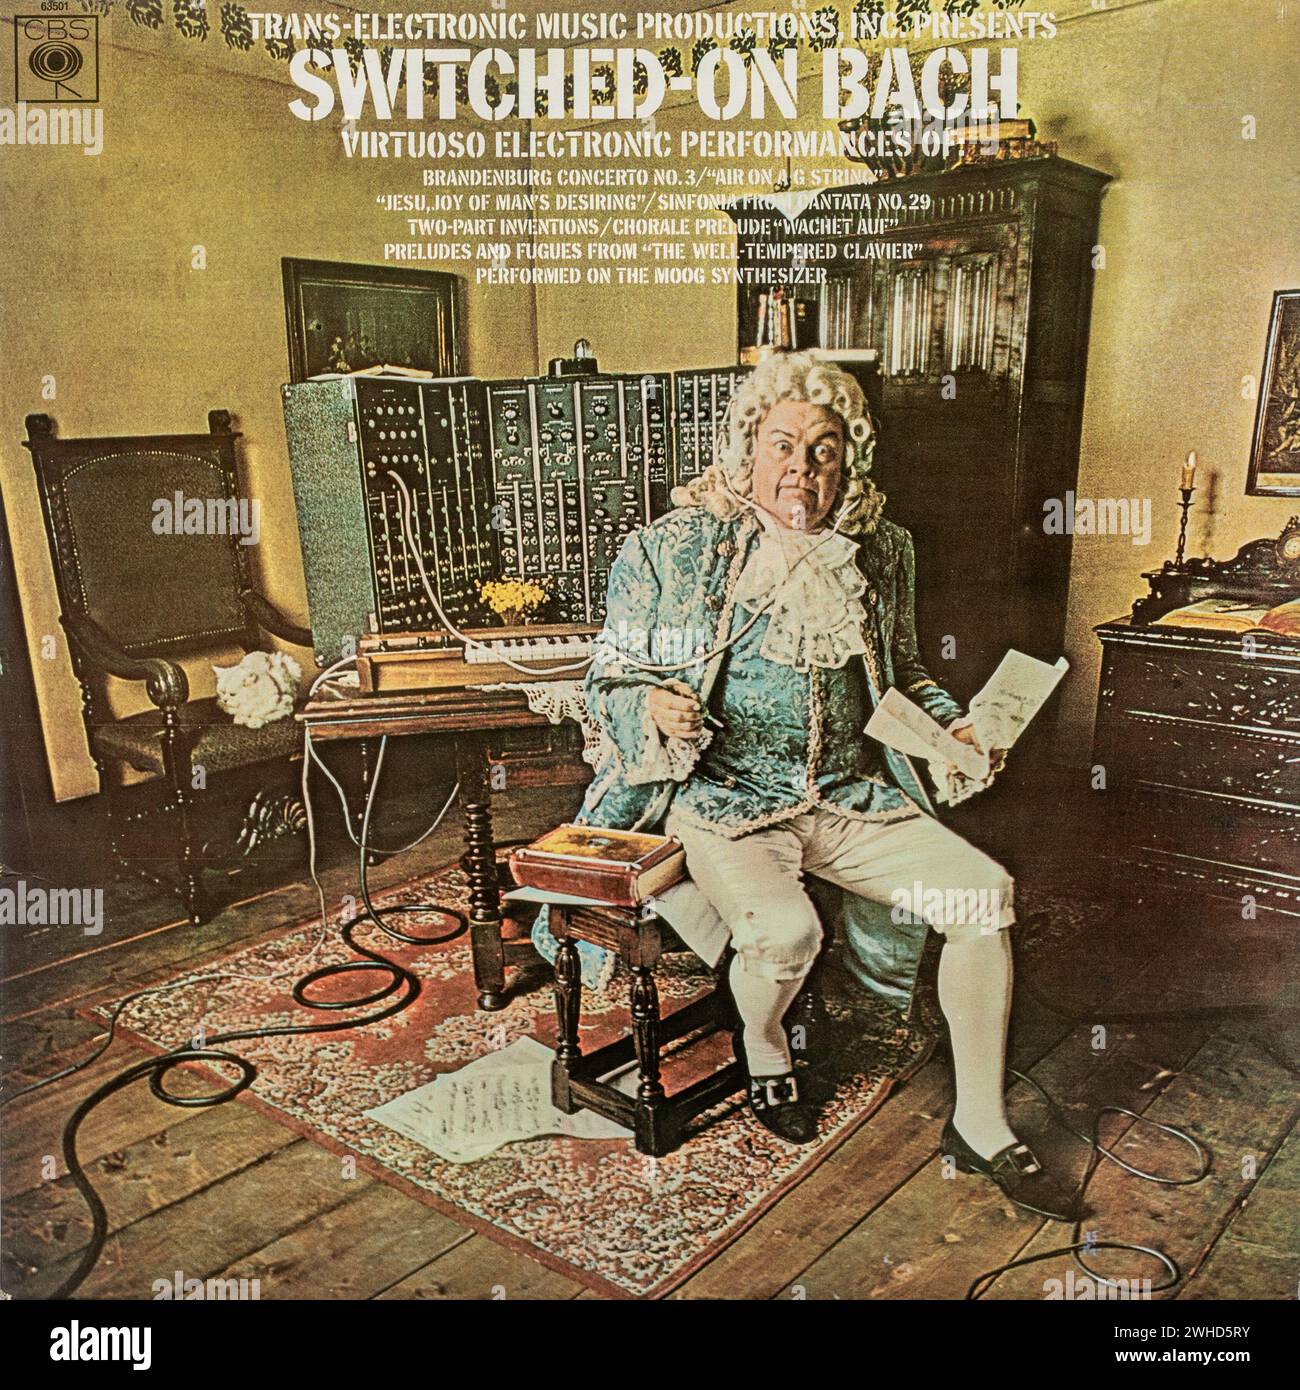 Walter or Wendy Carlos Switched on Bach vinyl LP record album cover Stock Photo